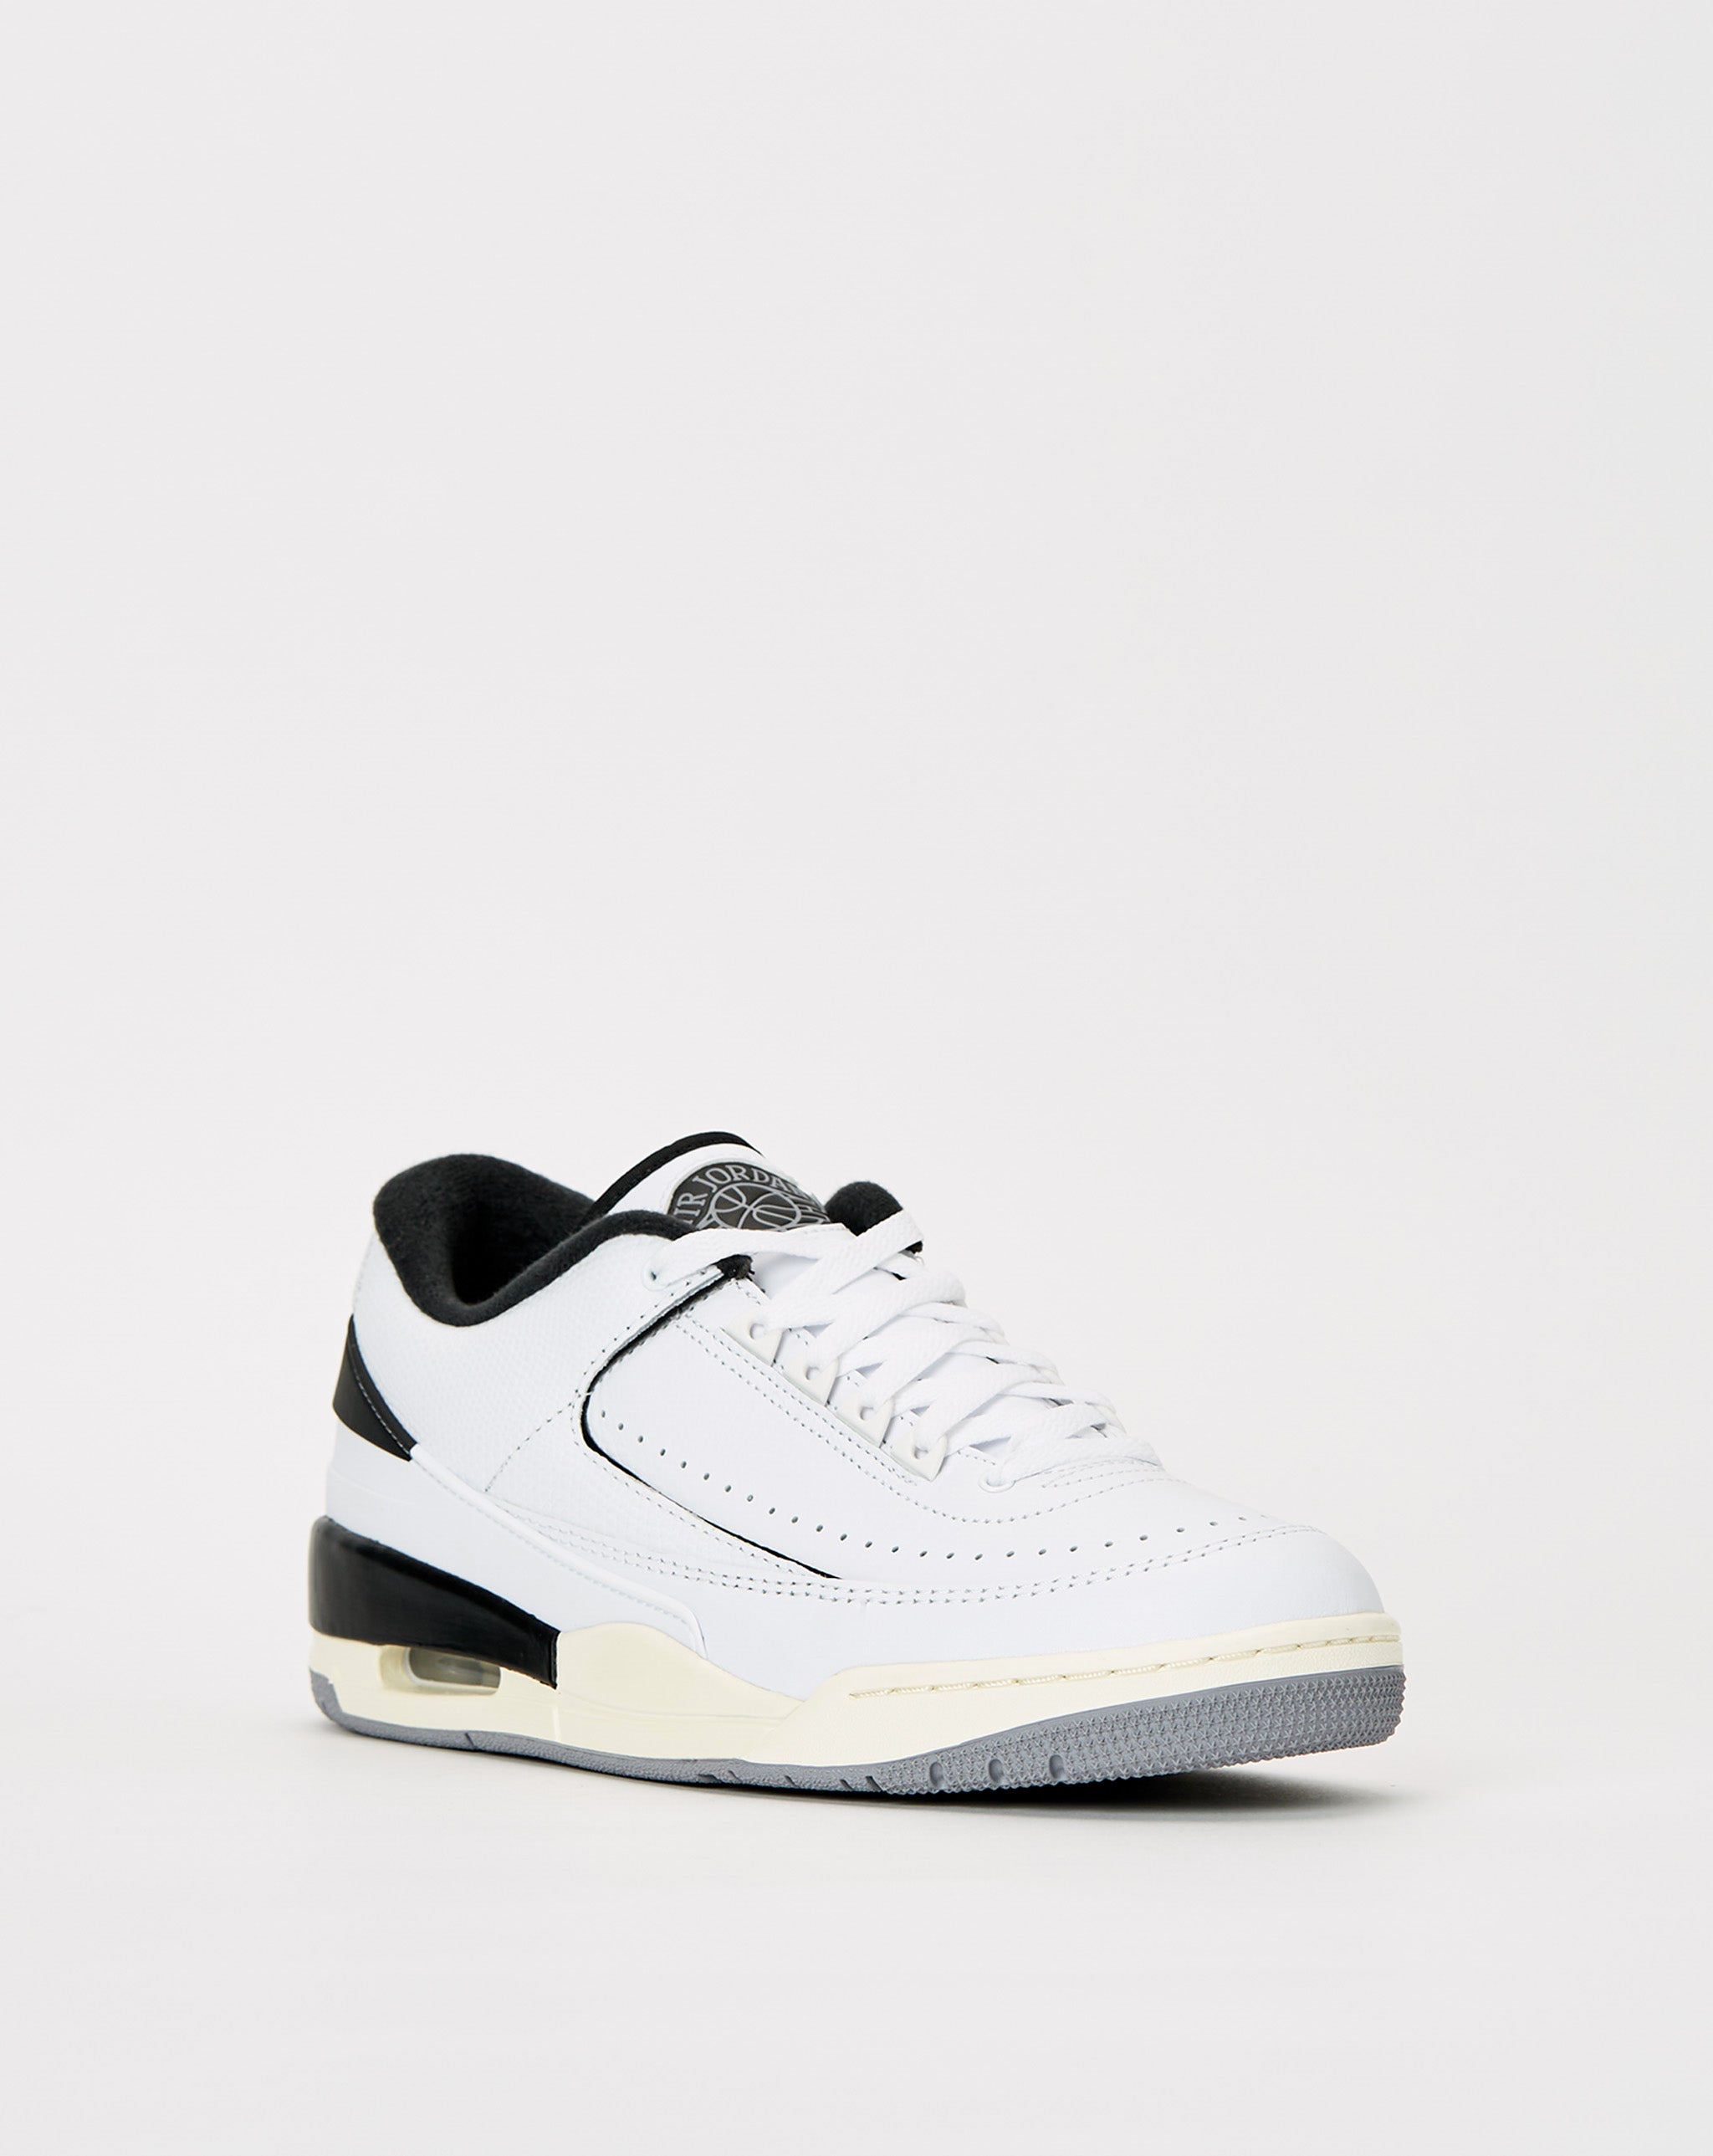 Pristine white laces and a white sole unit complete the look of this shoe